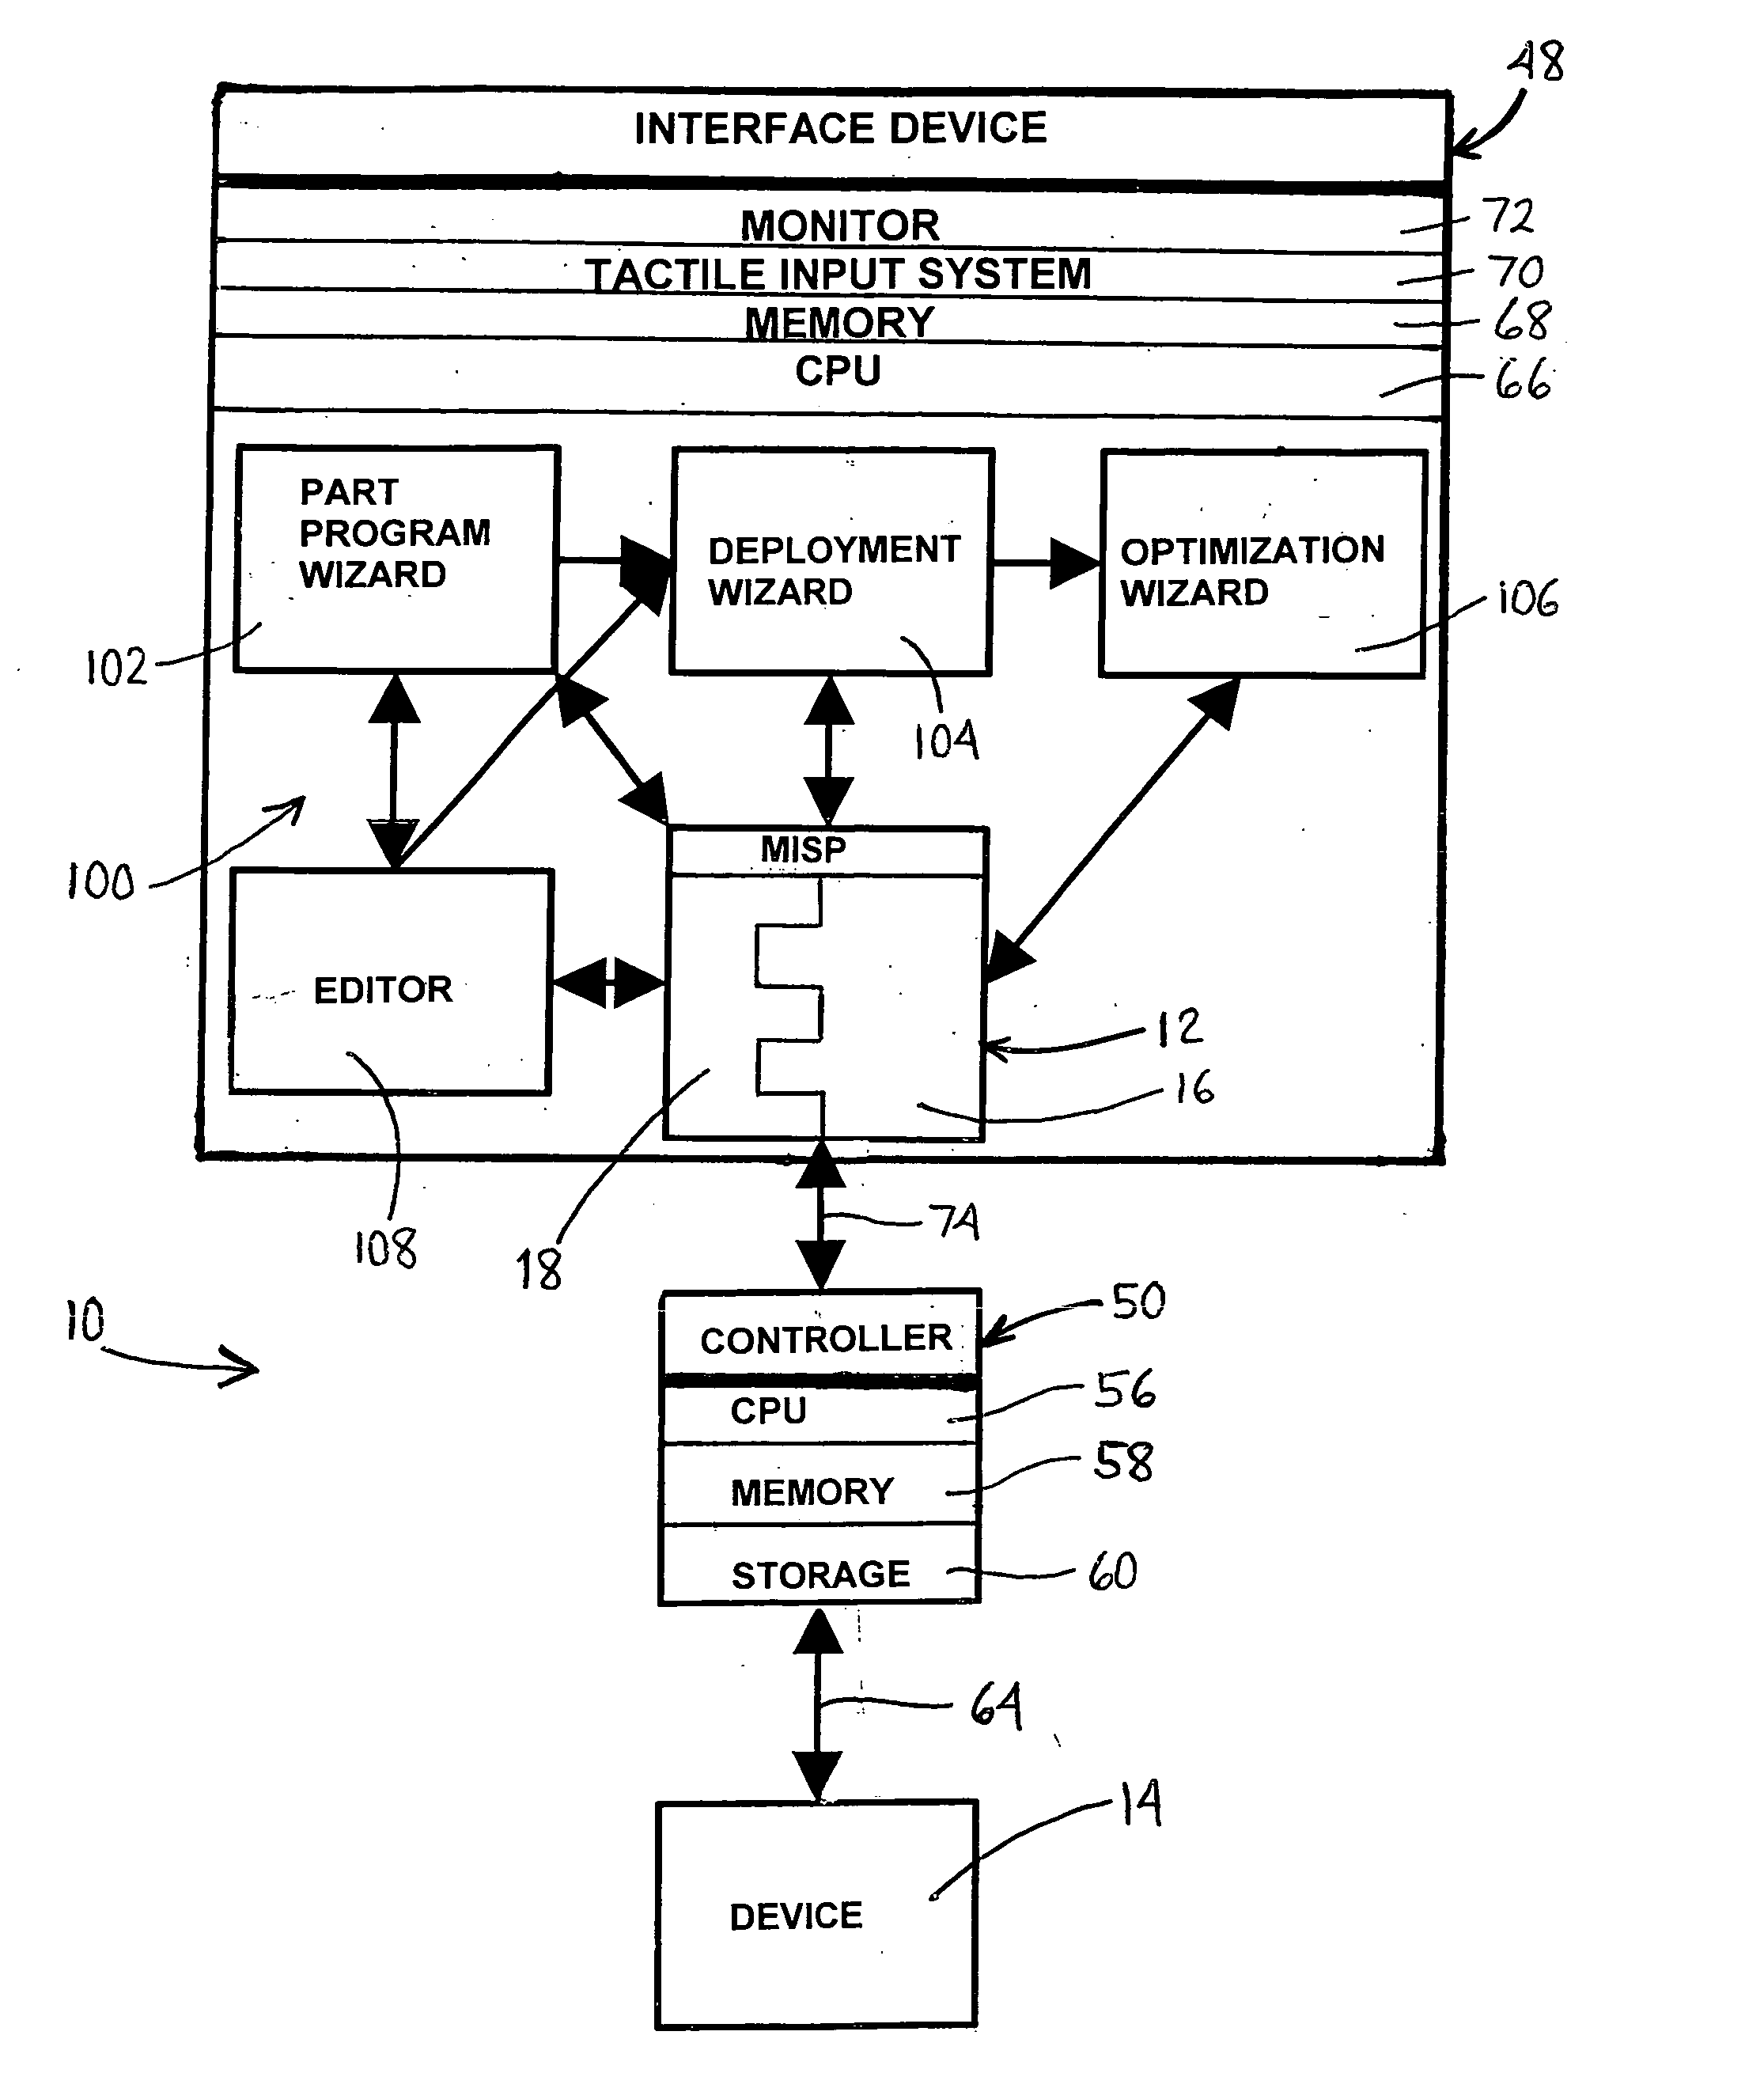 Method and apparatus for developing a software program